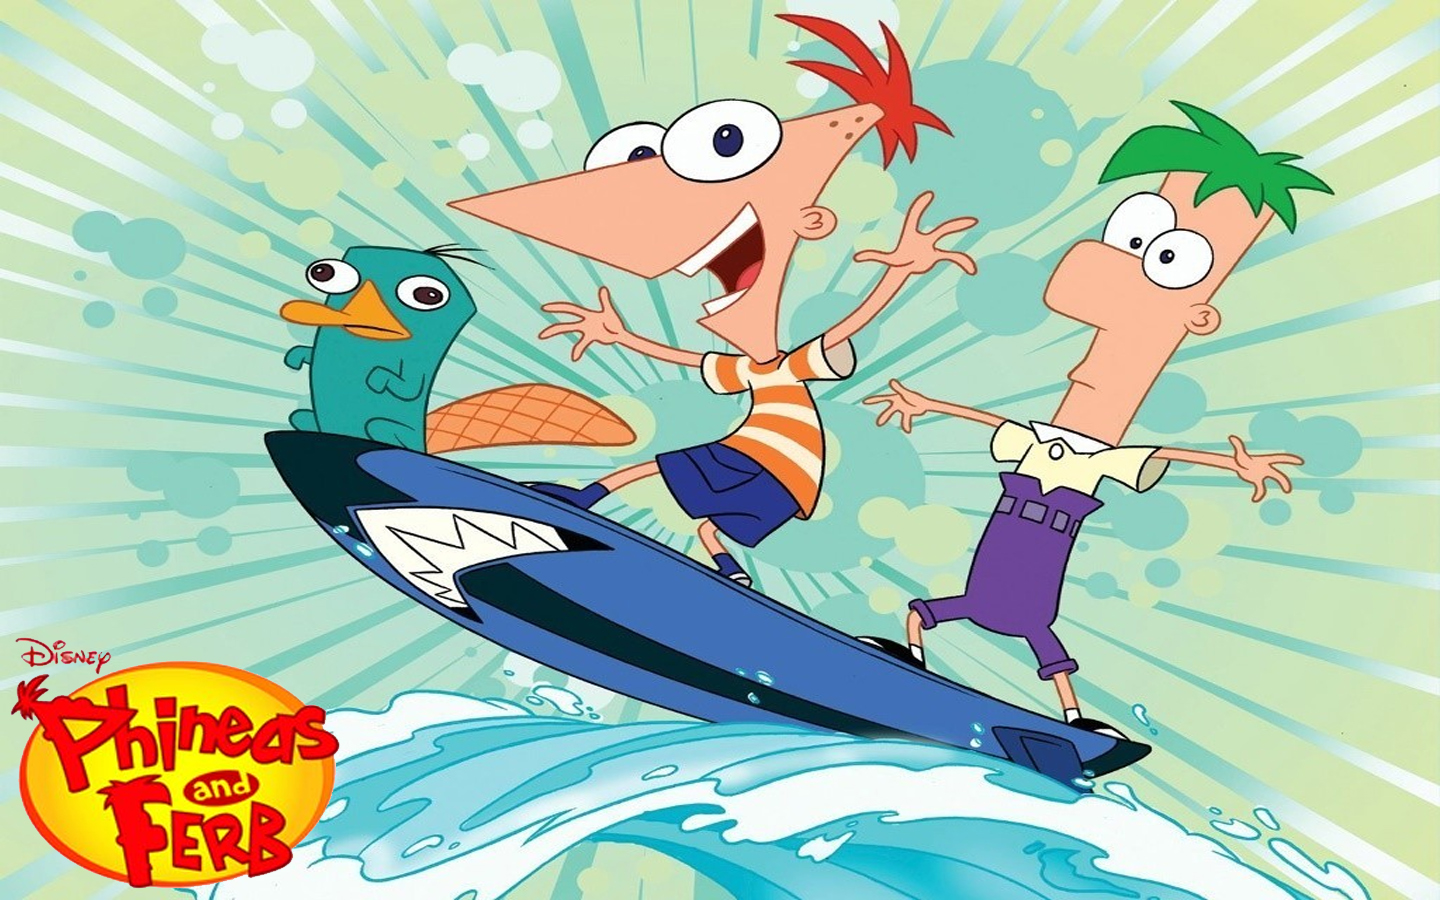 Phineas and Ferb Wallpaper 1.jpg